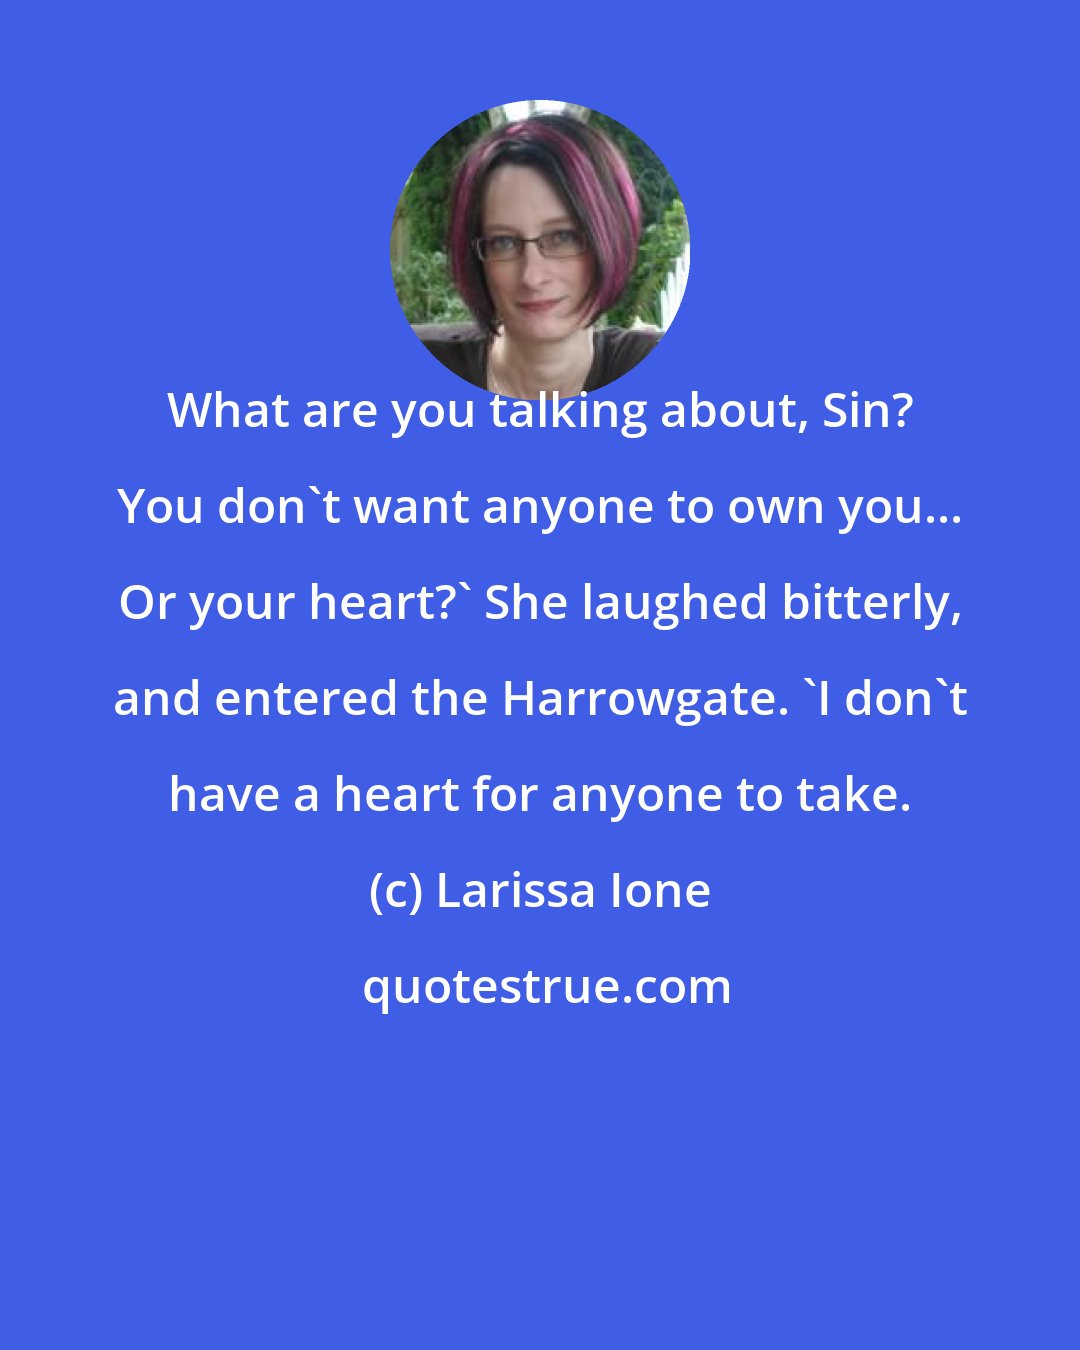 Larissa Ione: What are you talking about, Sin? You don't want anyone to own you... Or your heart?' She laughed bitterly, and entered the Harrowgate. 'I don't have a heart for anyone to take.